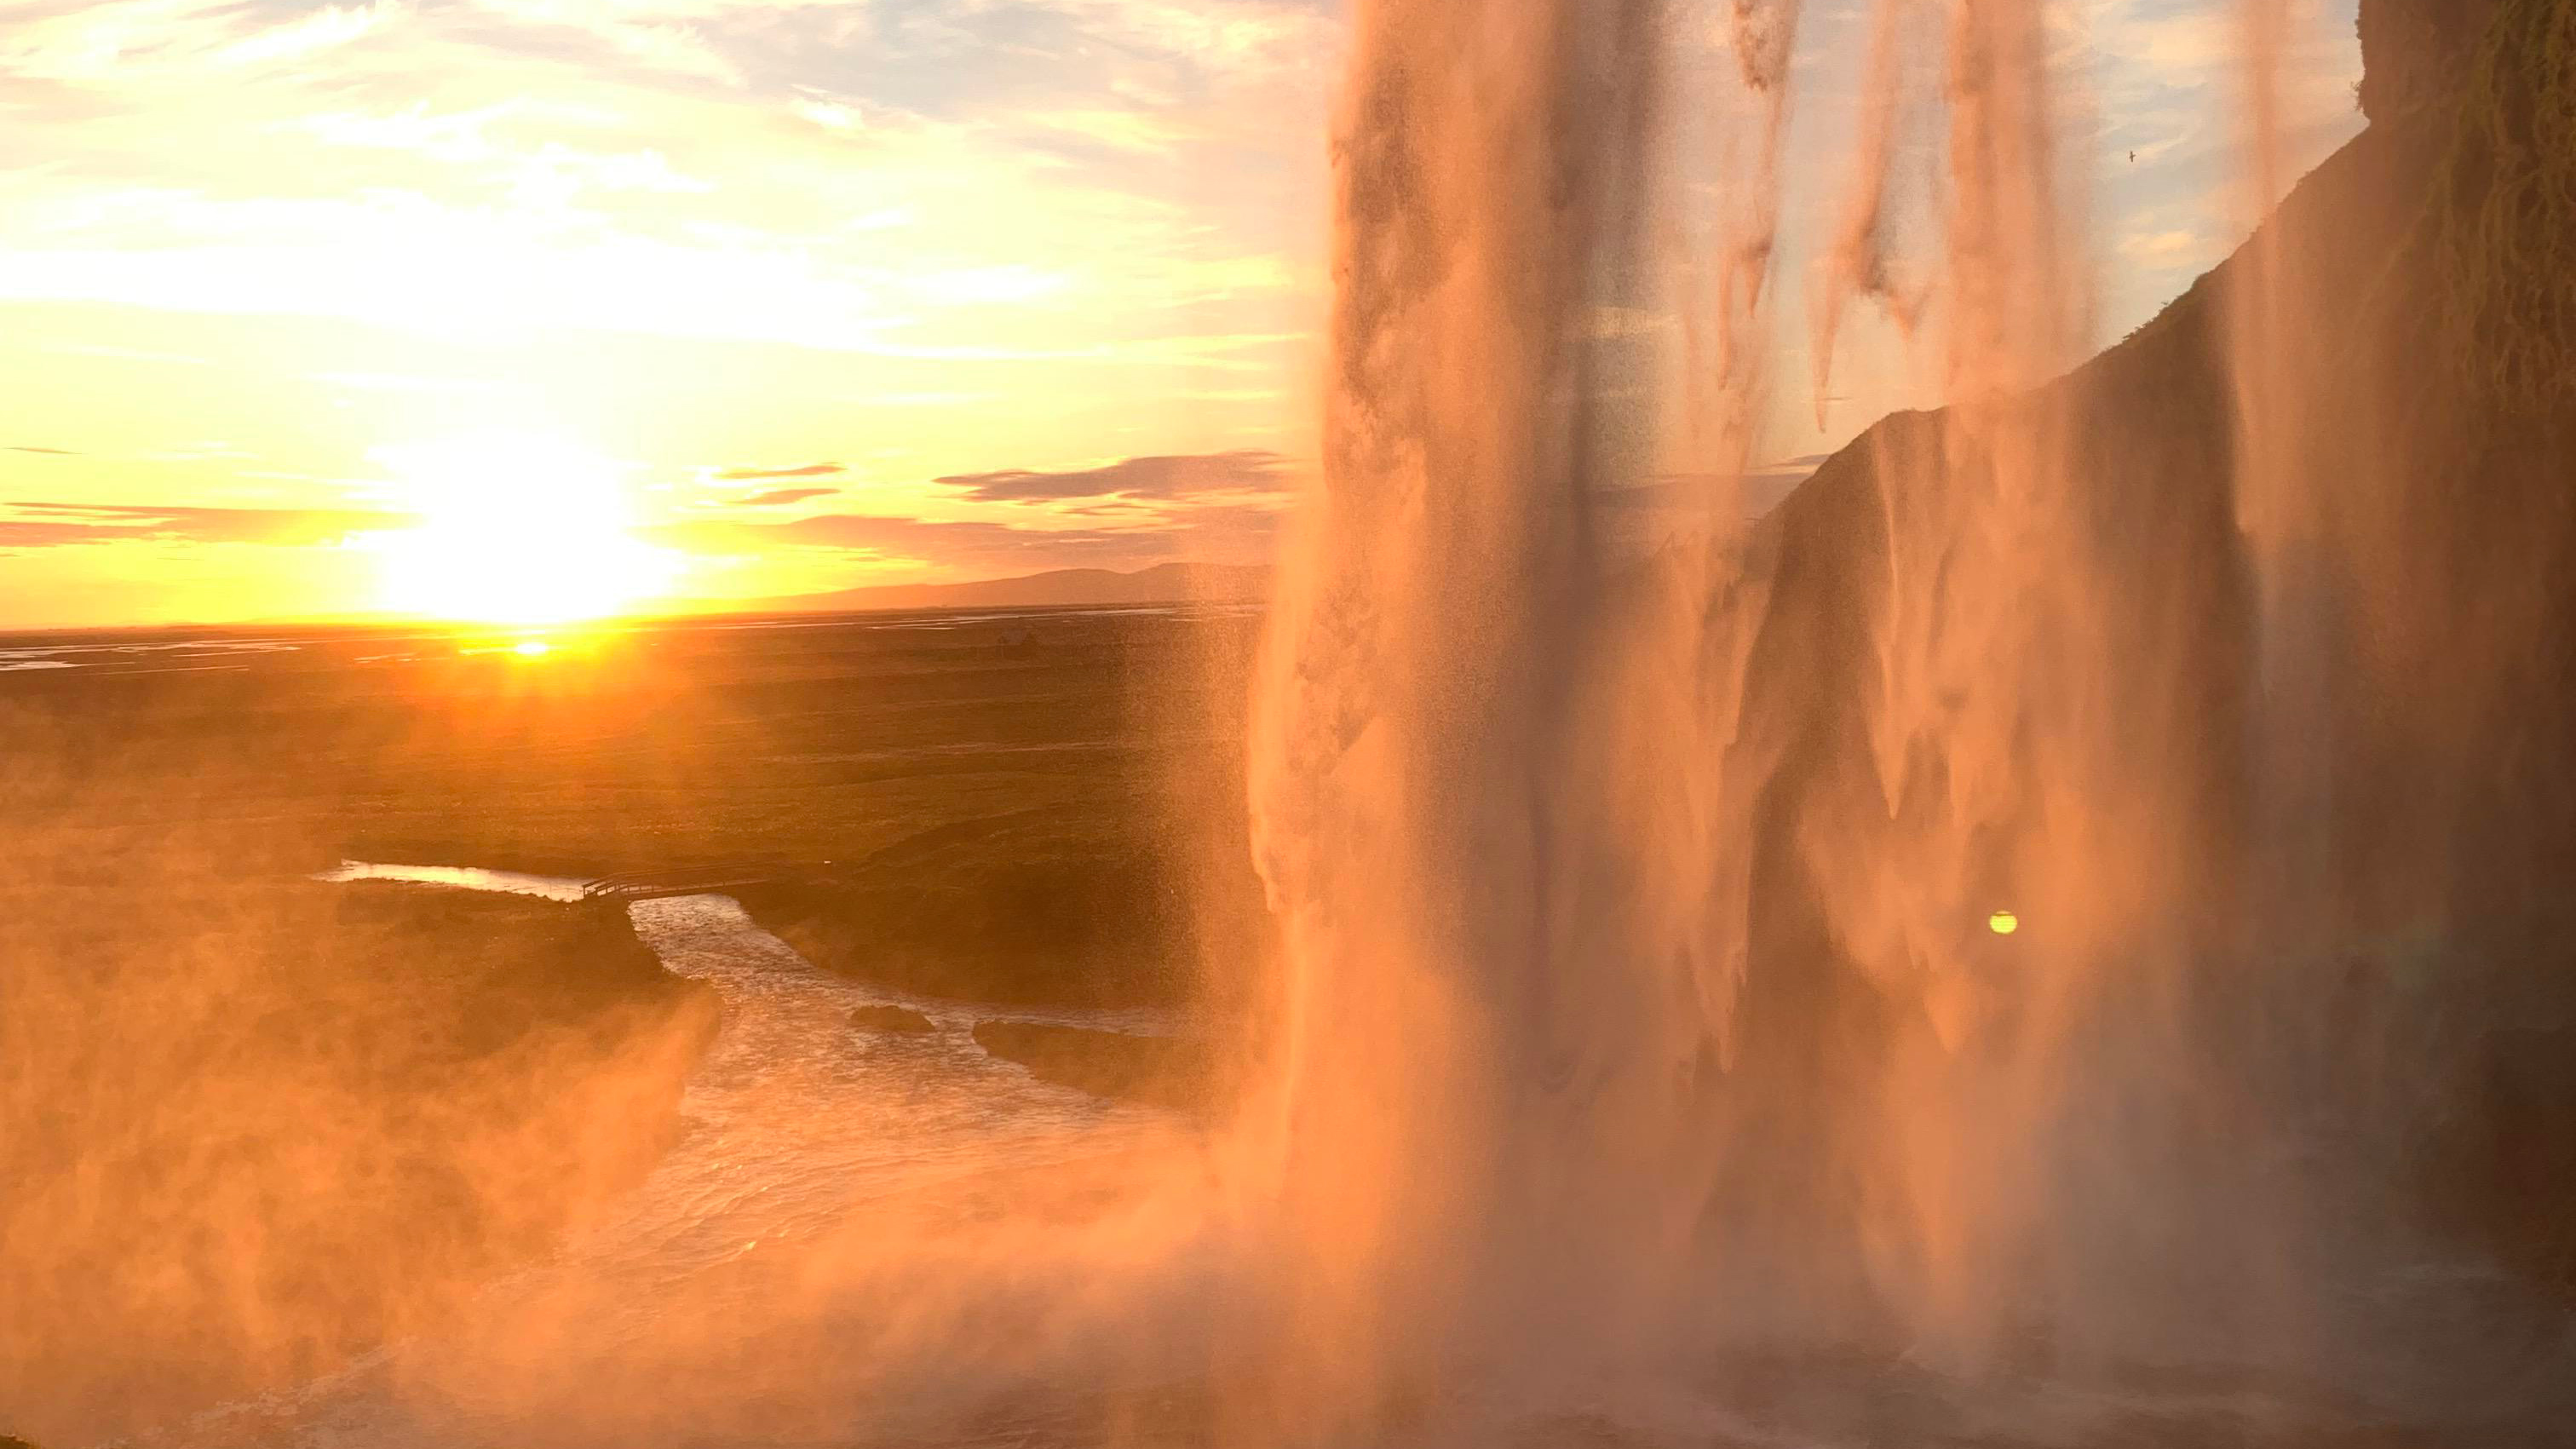 Falling water from the cliff at sunset